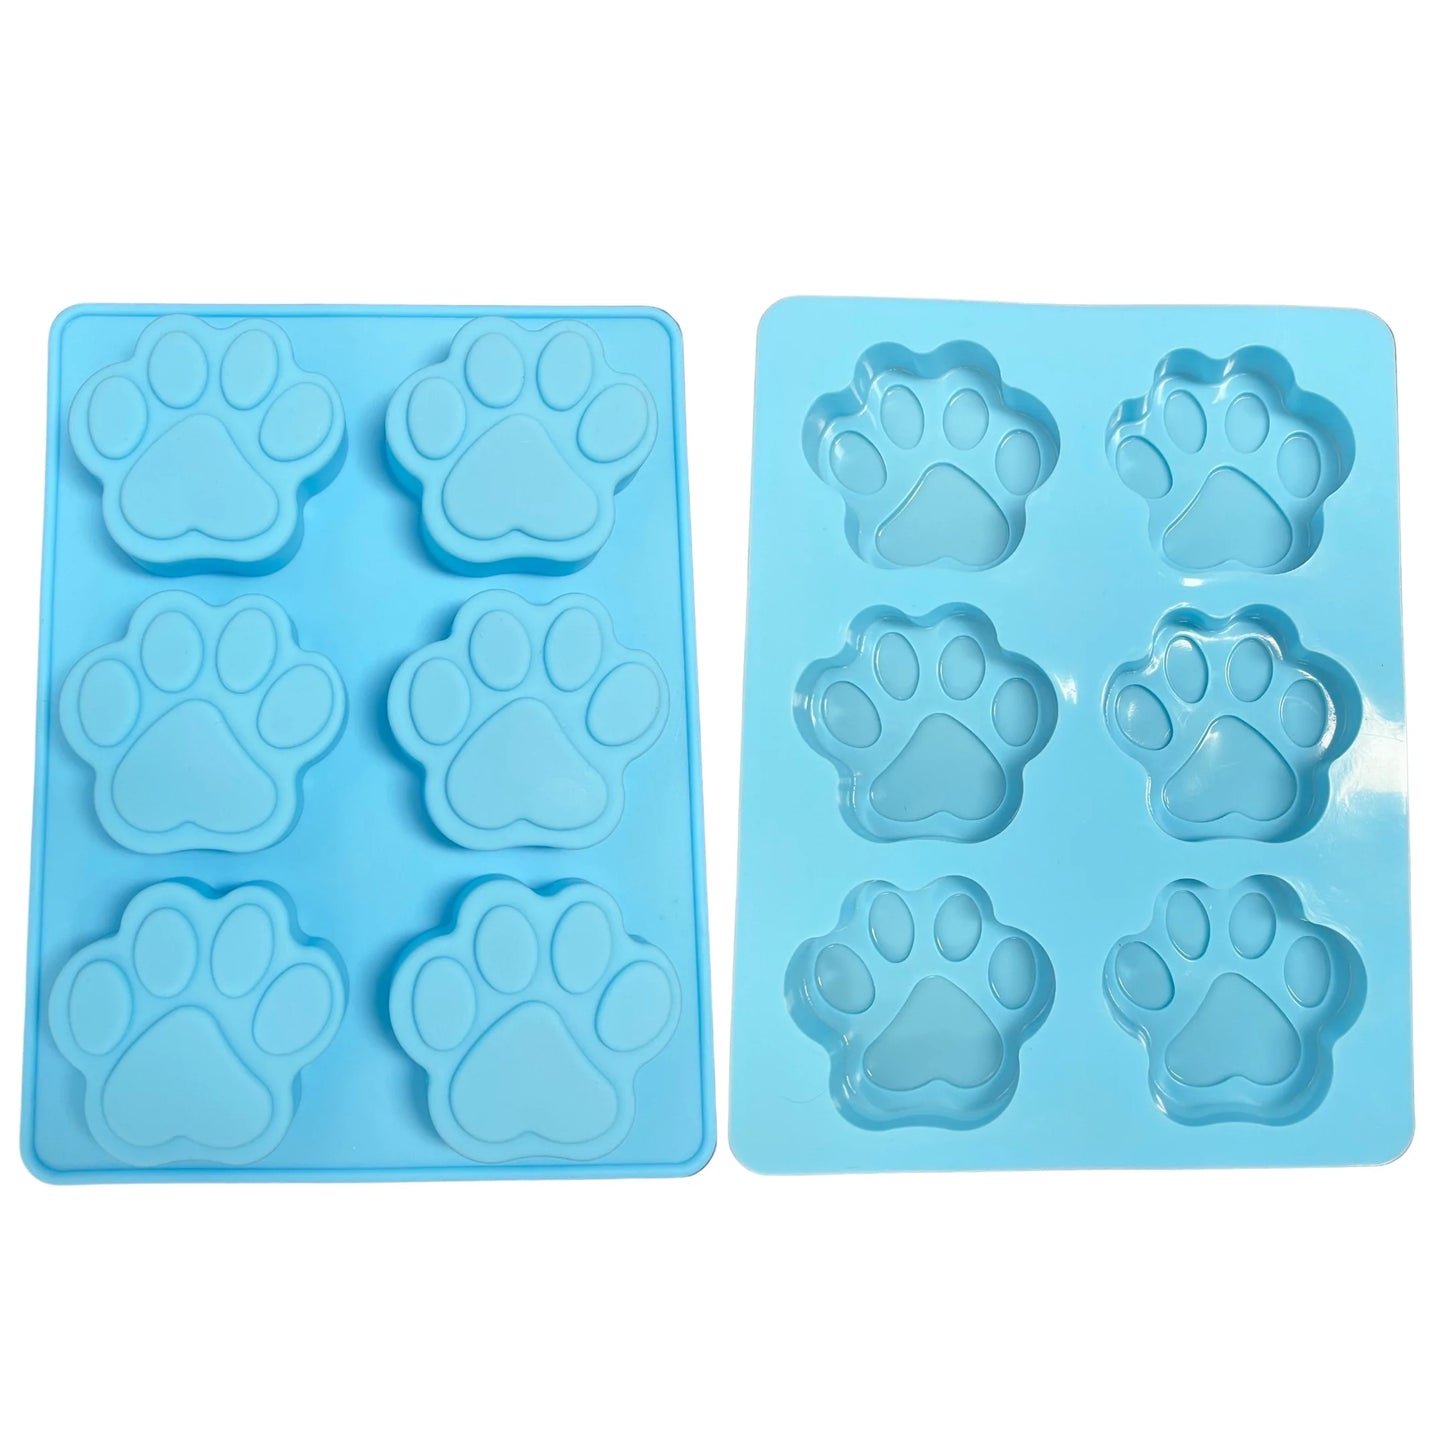 Paws Silicon Mould Blue